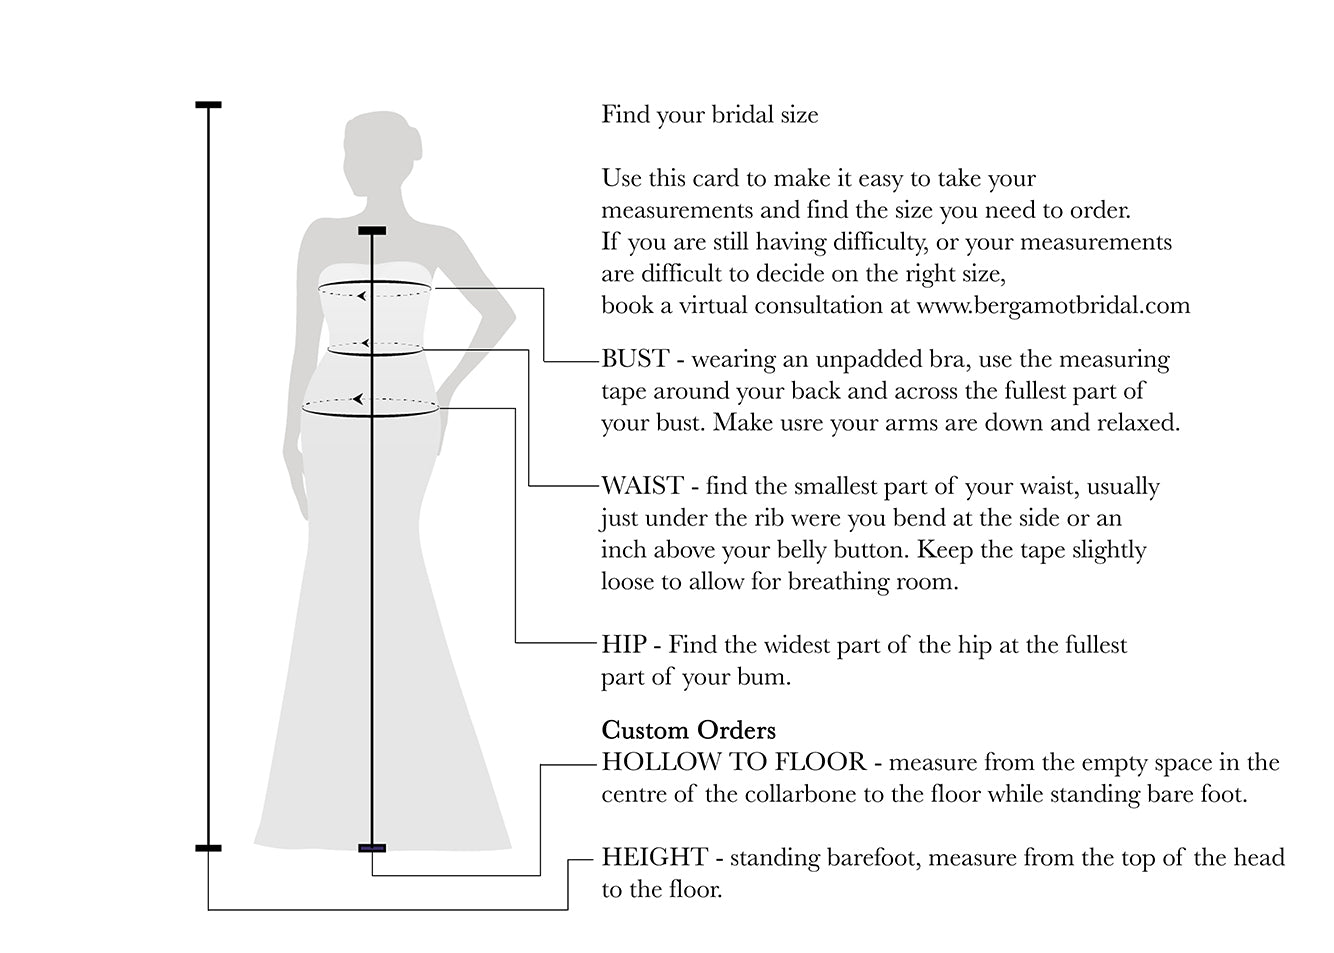 Diagram illustrating how to take body measurements for a Simple Beaded Fit And Flare Gown with V Neckline And Crepe Skirt from Bergamot Bridal, including bust, waist, hip, and hollow to floor measurements.